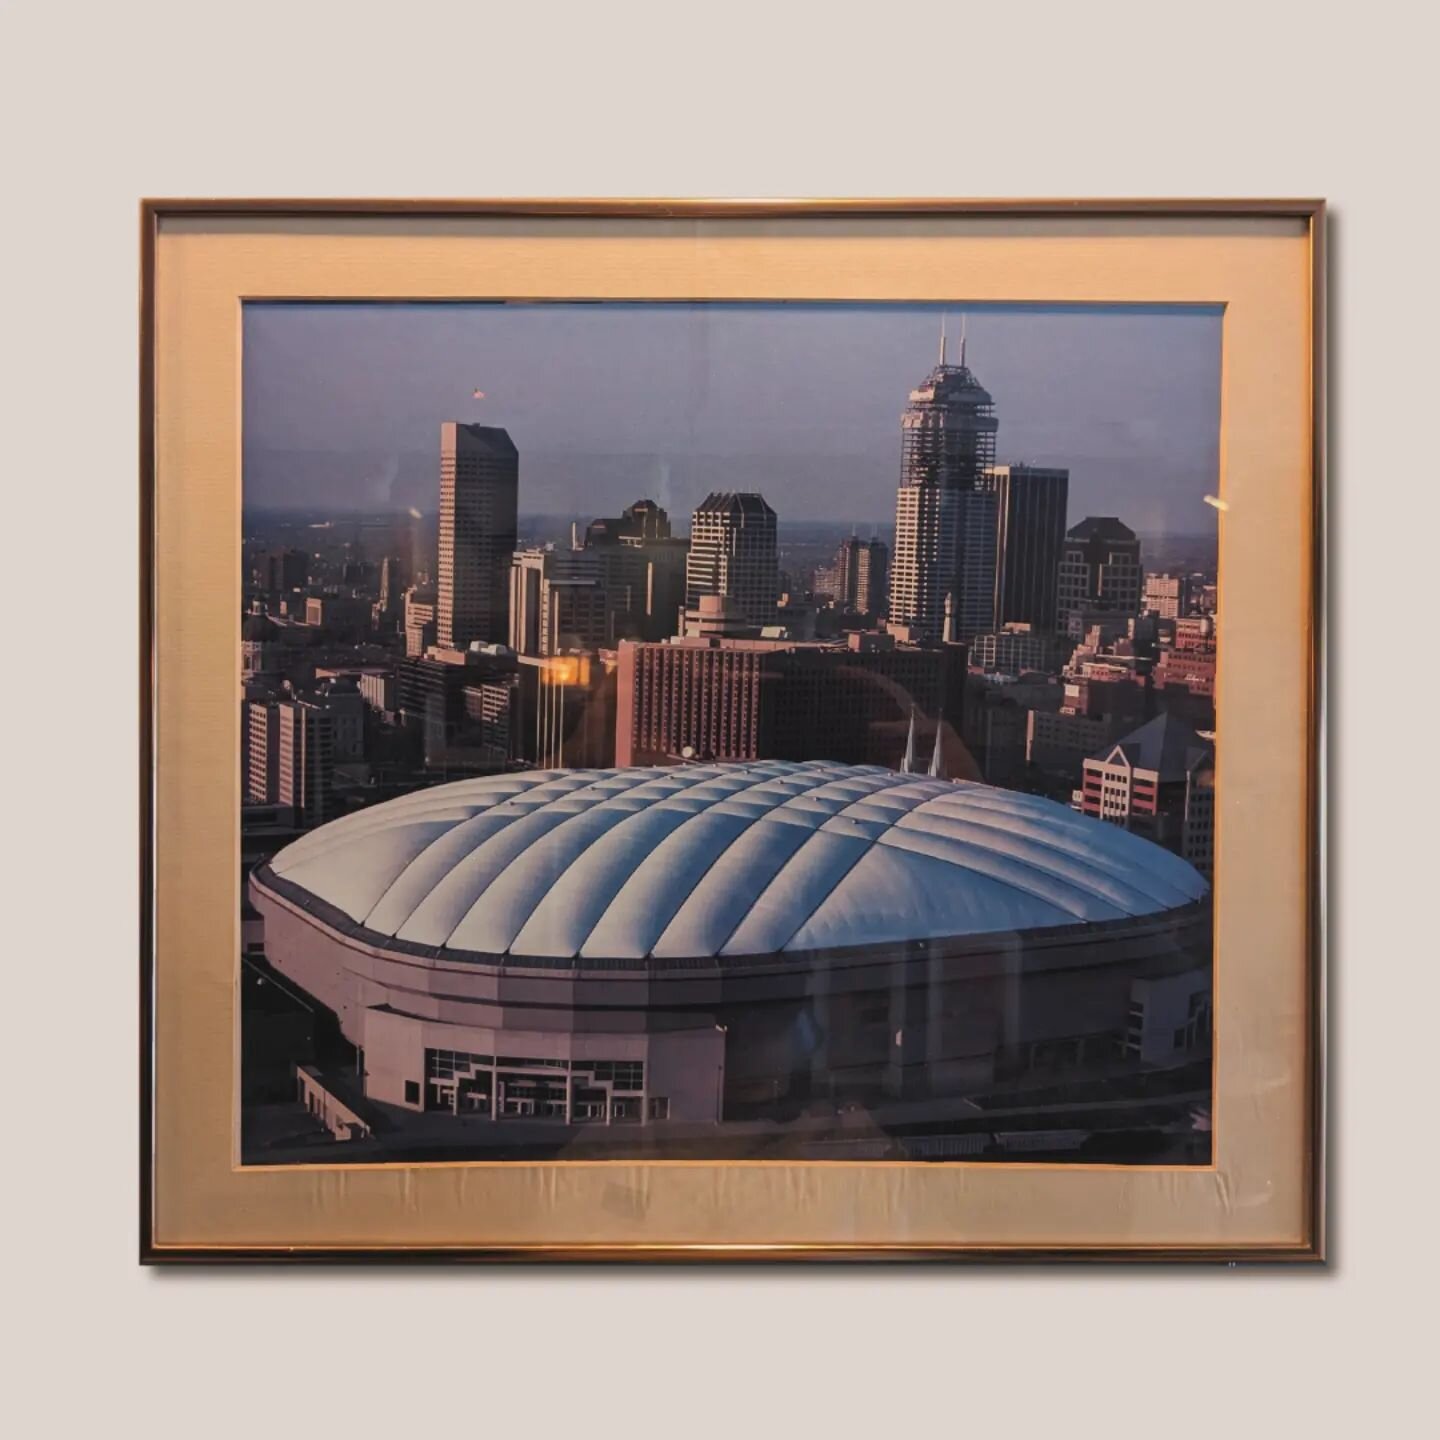 Retro Indy - Framed print featuring the Hoosier Dome and Bank One Tower under construction c1989.  Tag a Hoosier that needs a heavy dose of nostalgia. #imahoosieritsnotmyfault